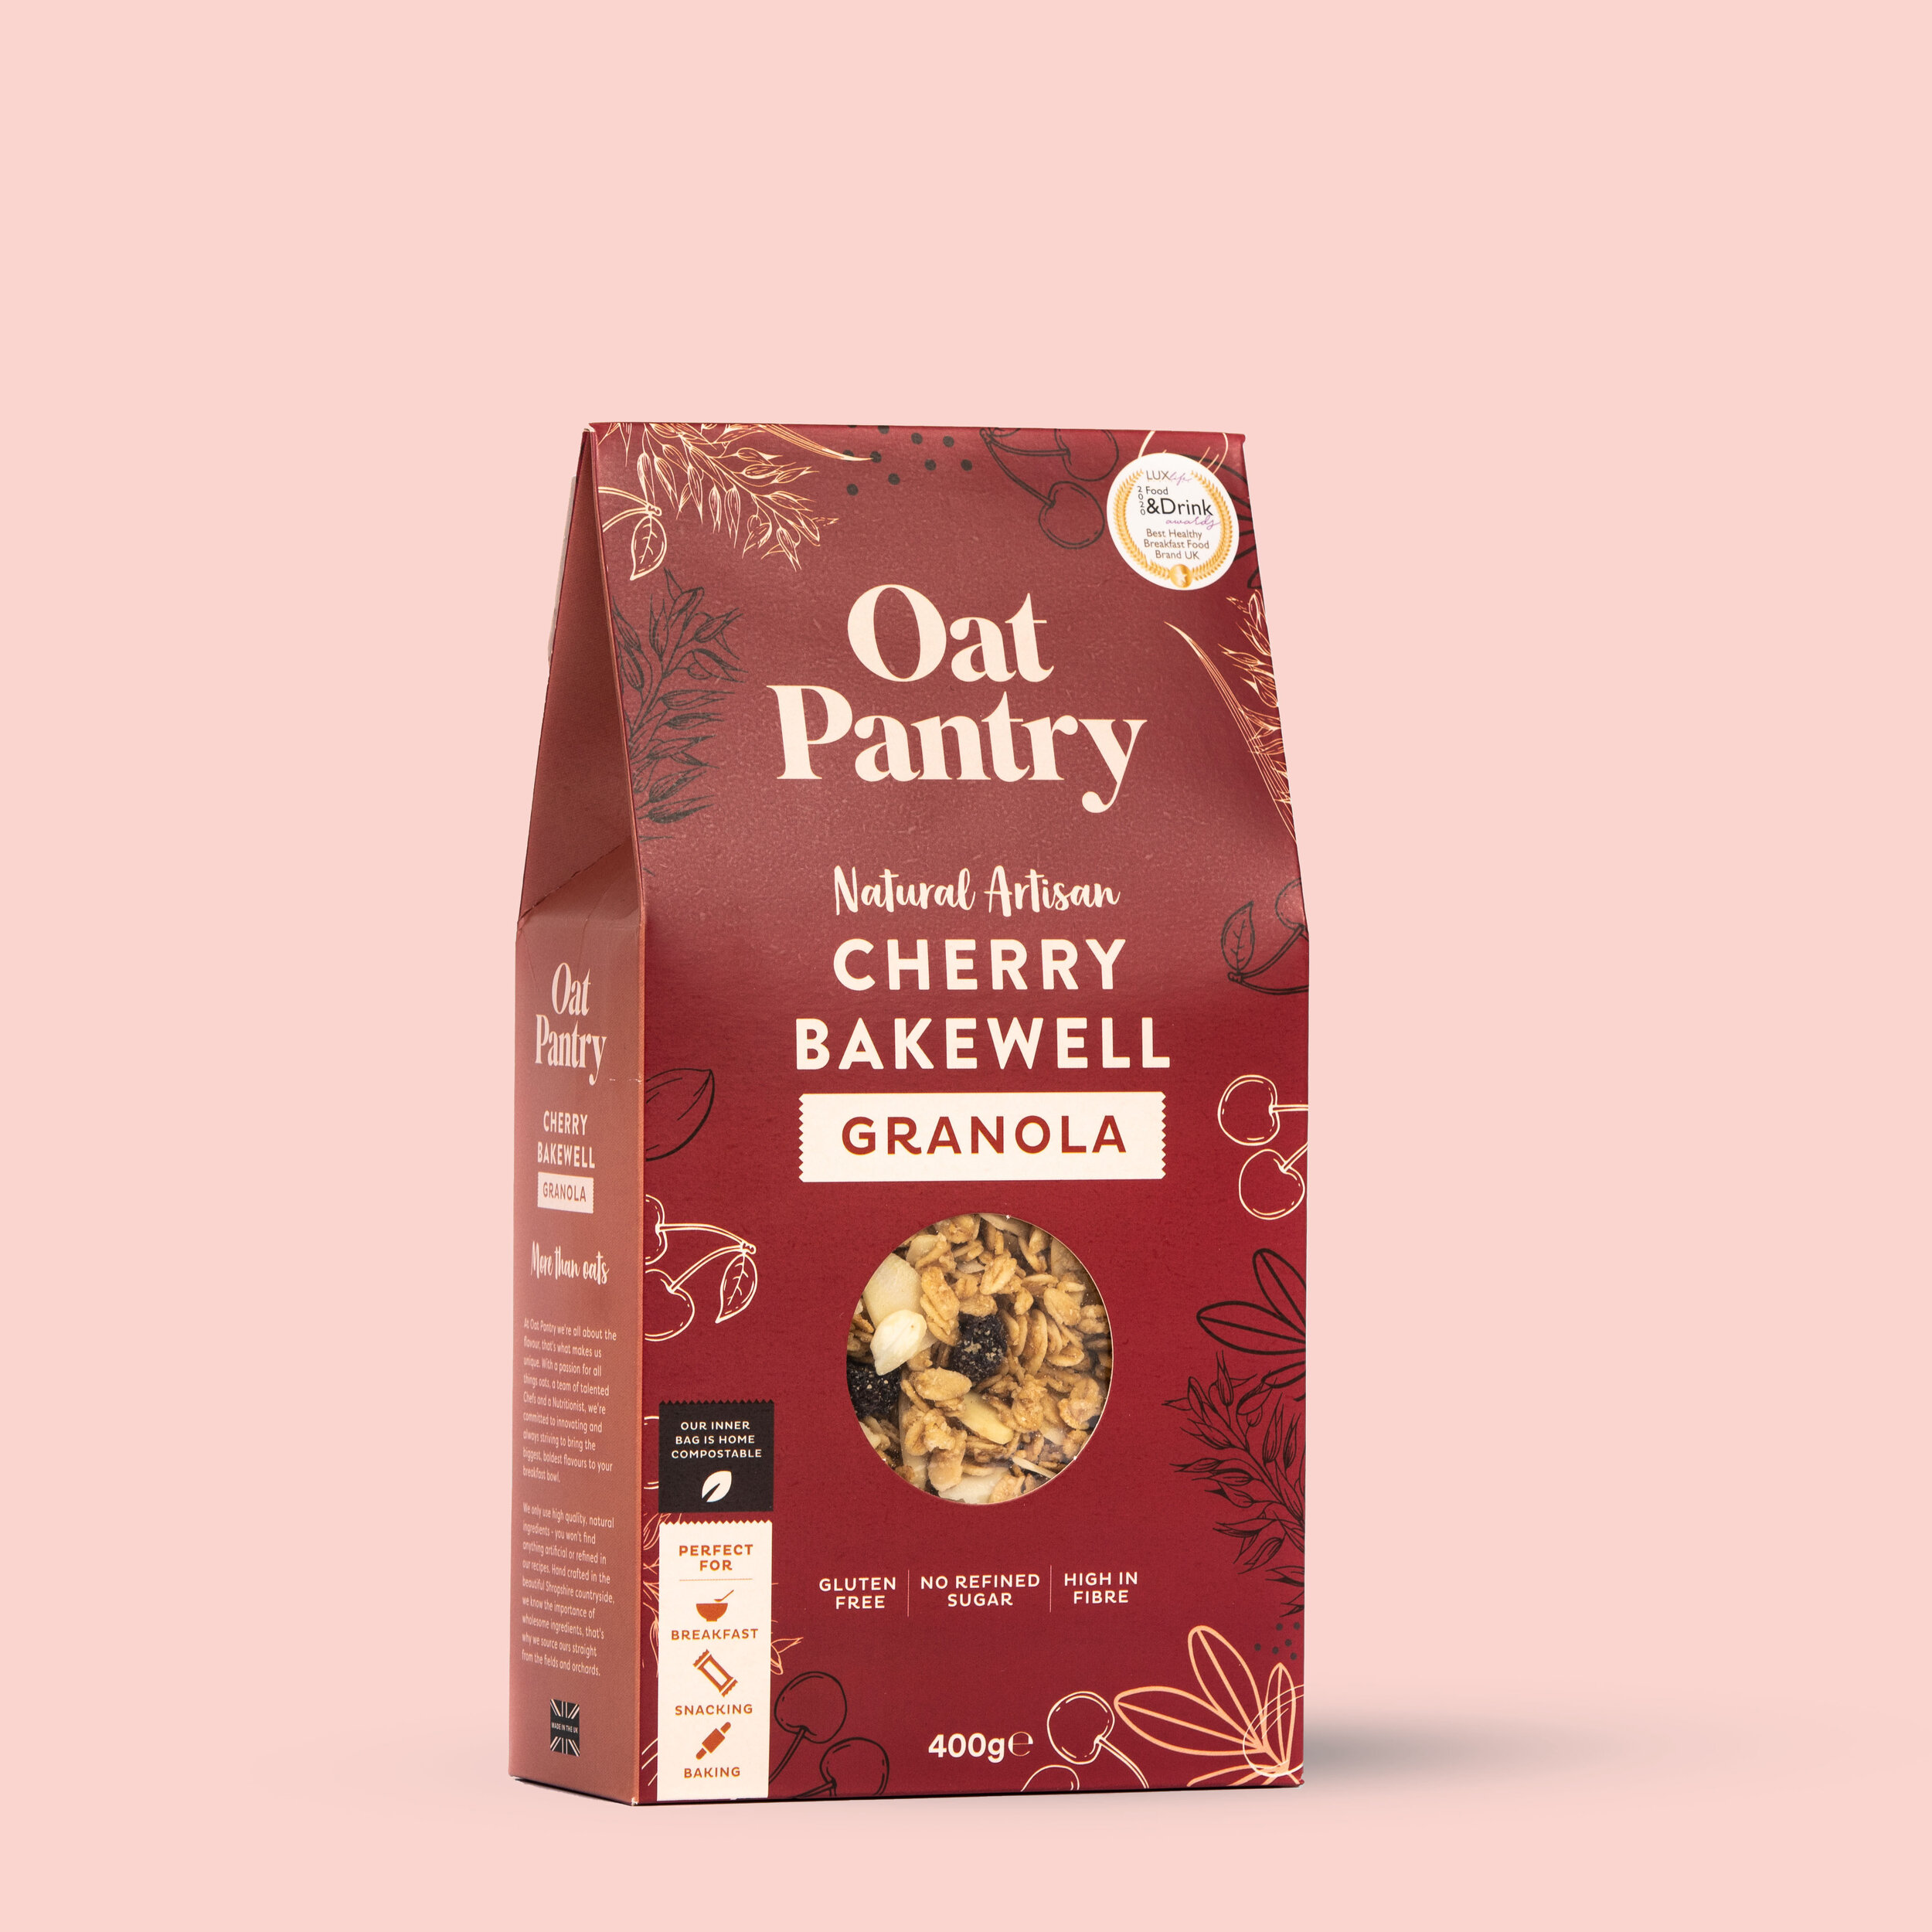 A maroon flat-pouch of Oat Pantry granola